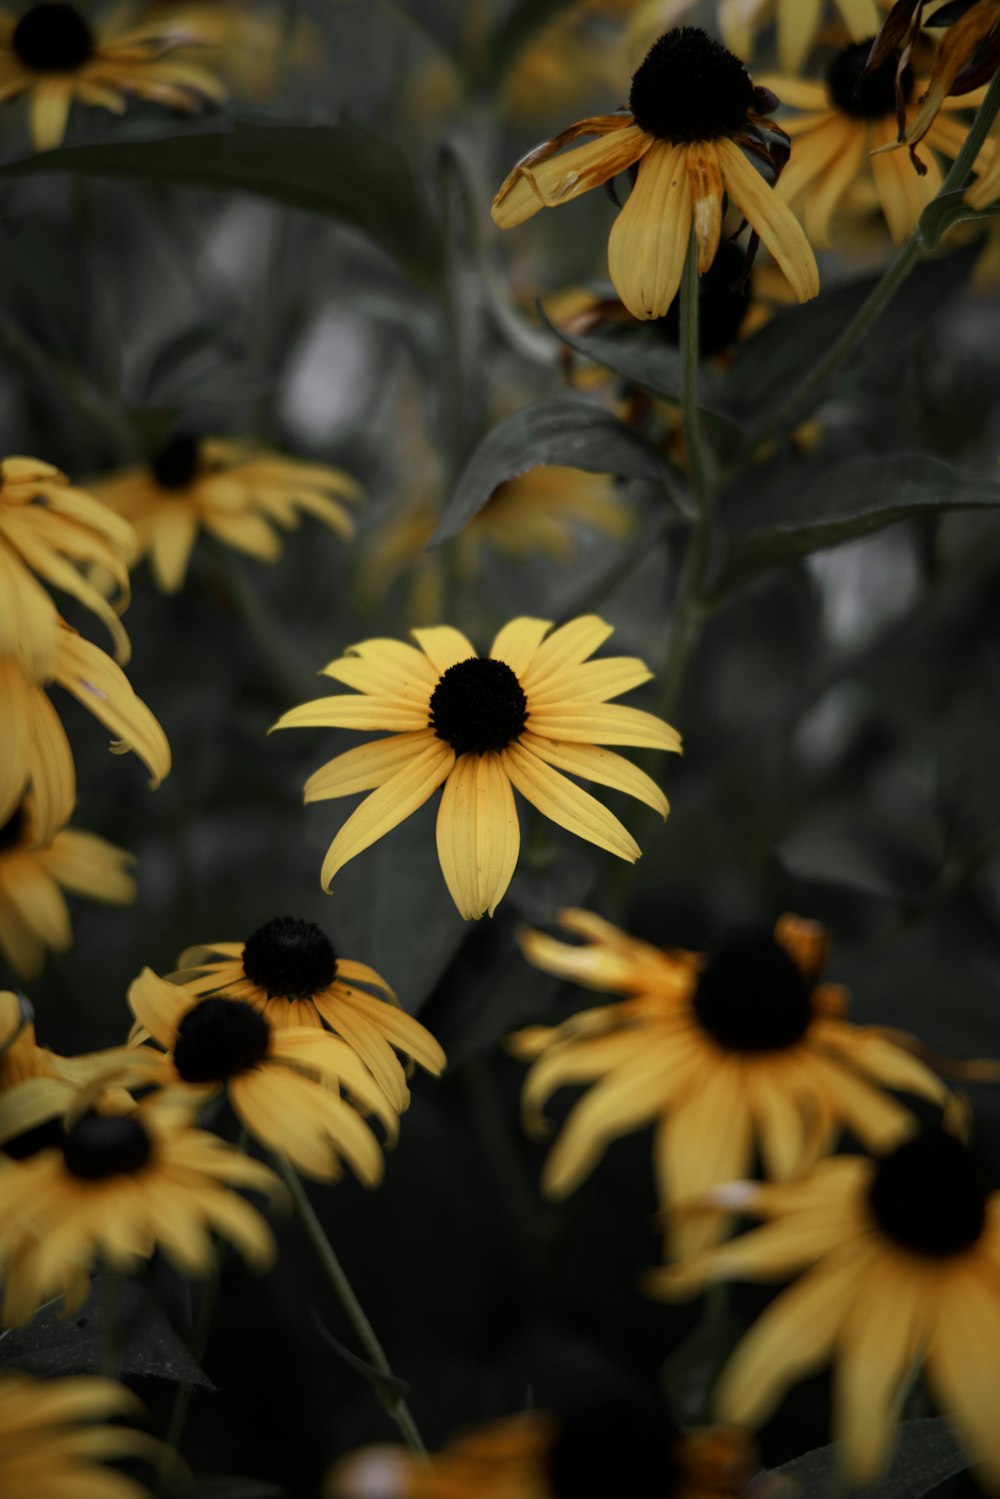 yellow and black sunflower in close up photography